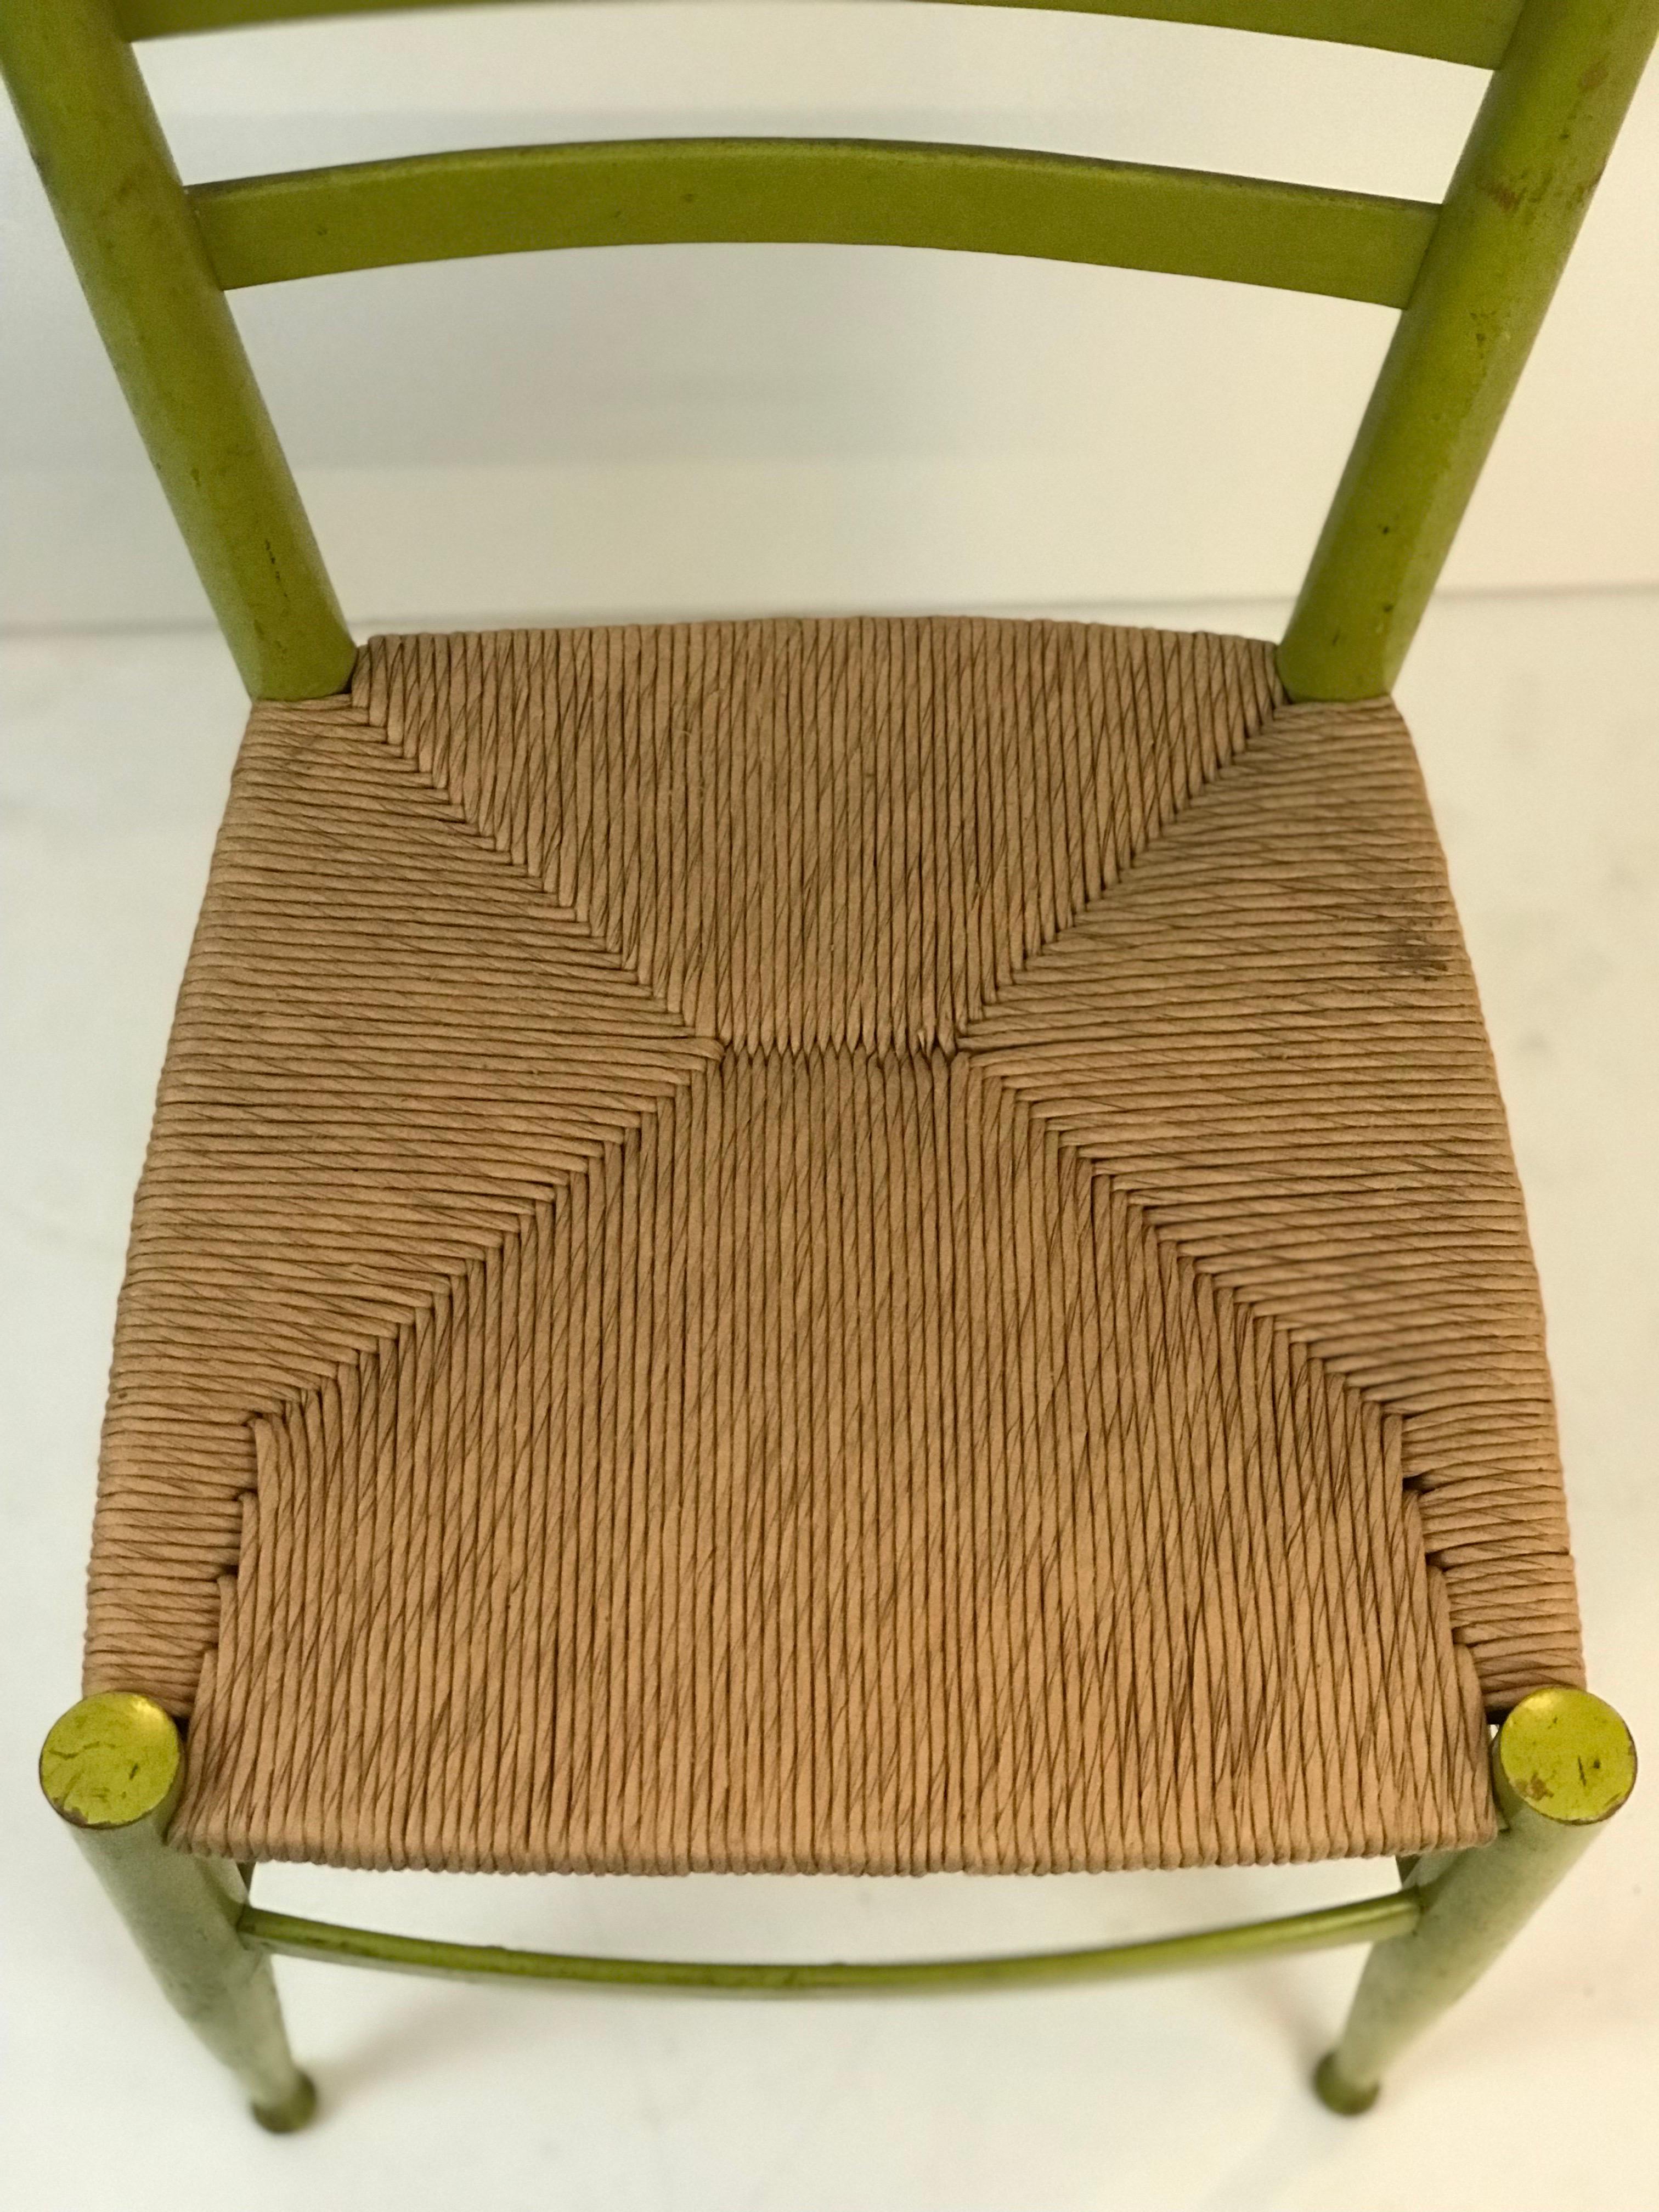 A Rustic Chiavari Spinetto Chair in Green Finish with Newly Rewoven Seat In Good Condition For Sale In Fort mill, SC